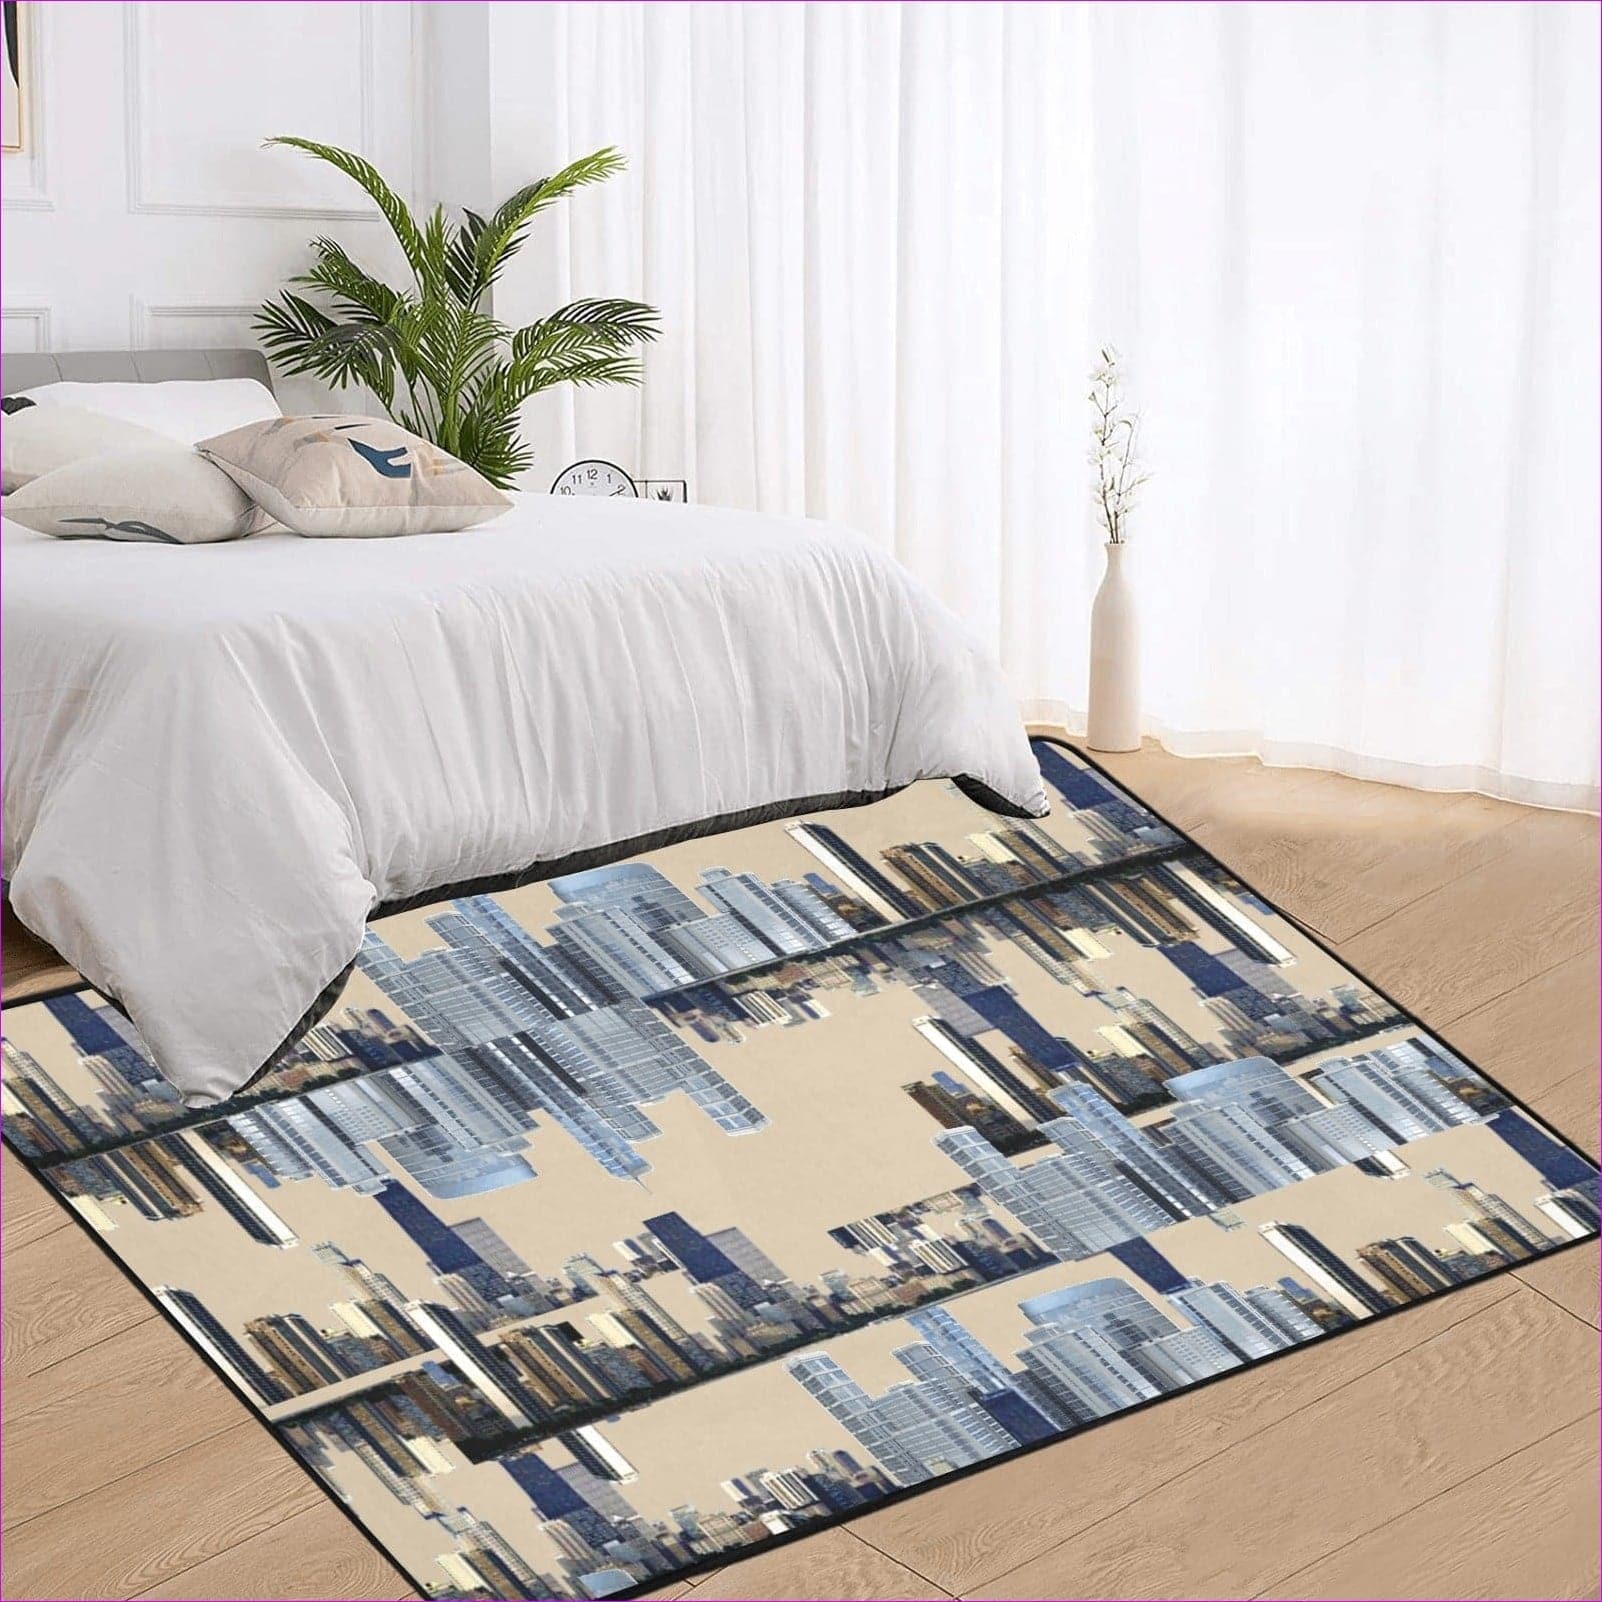 - City Blocks Area Rug (4 colors) - area rug at TFC&H Co.